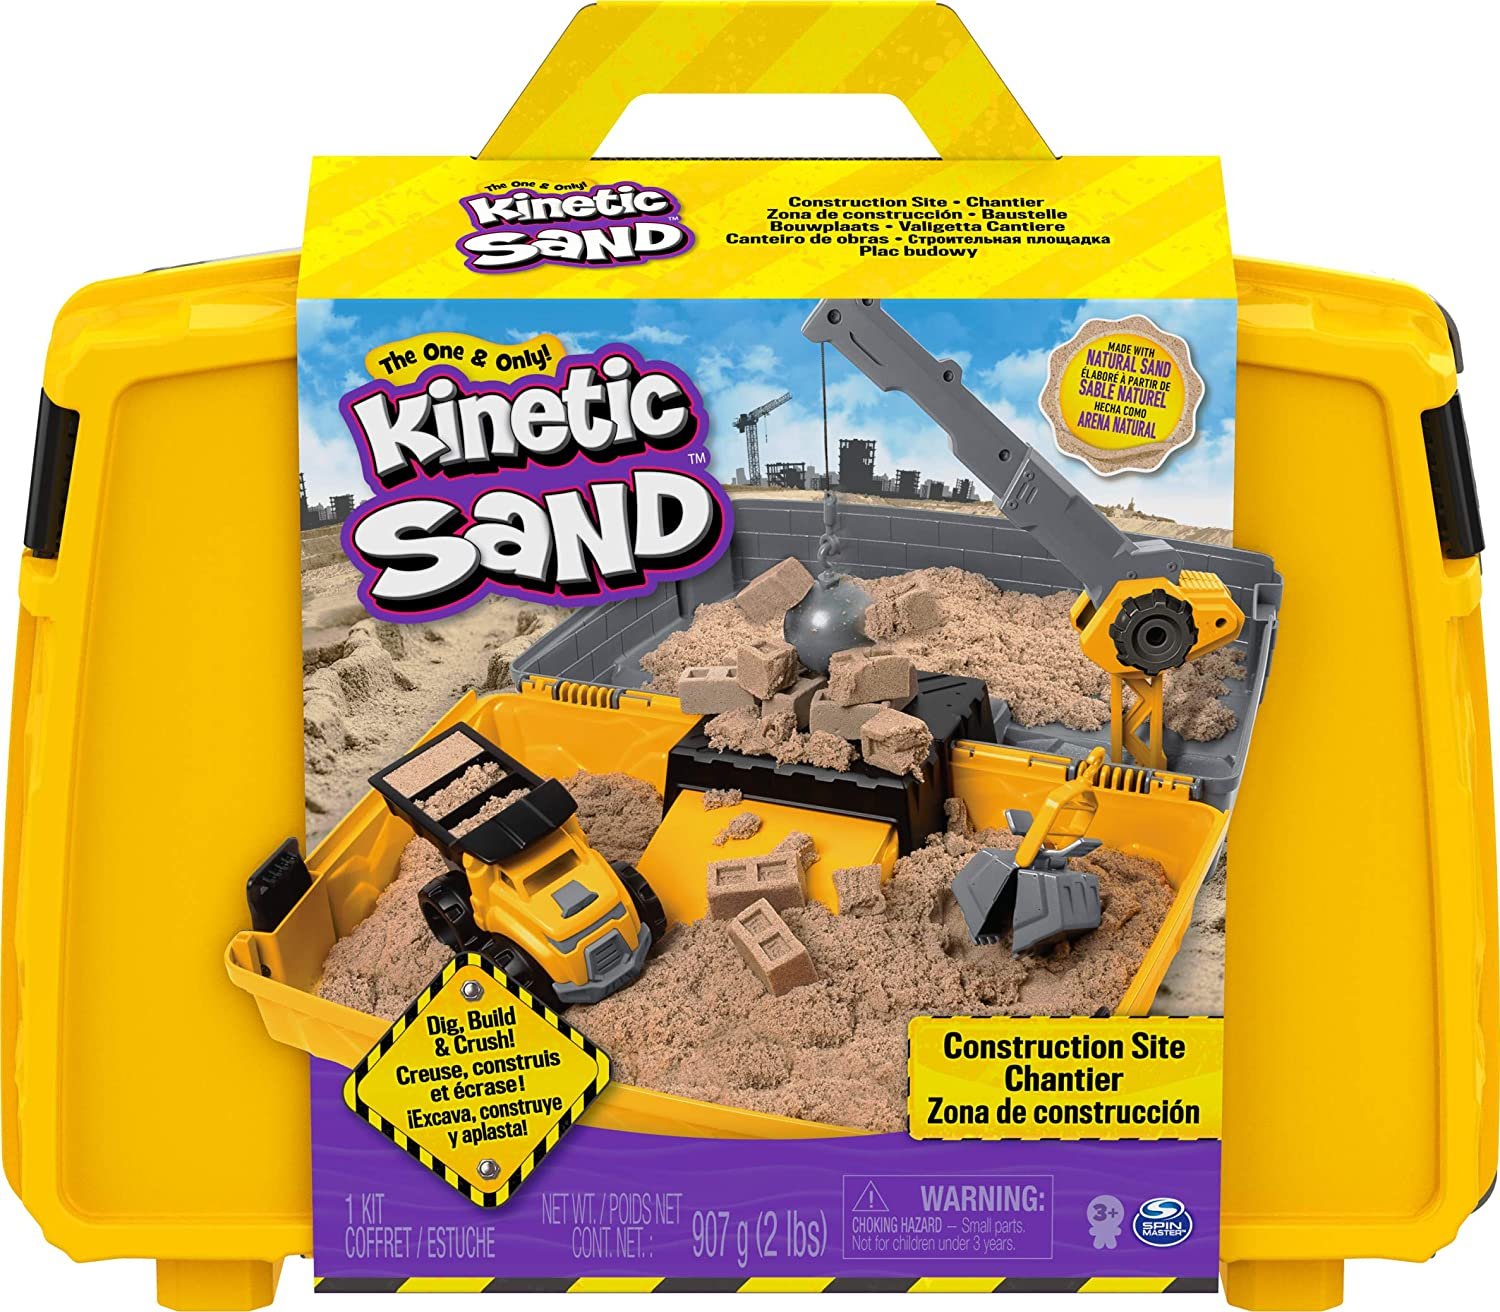 Kinetic Sand Construction site